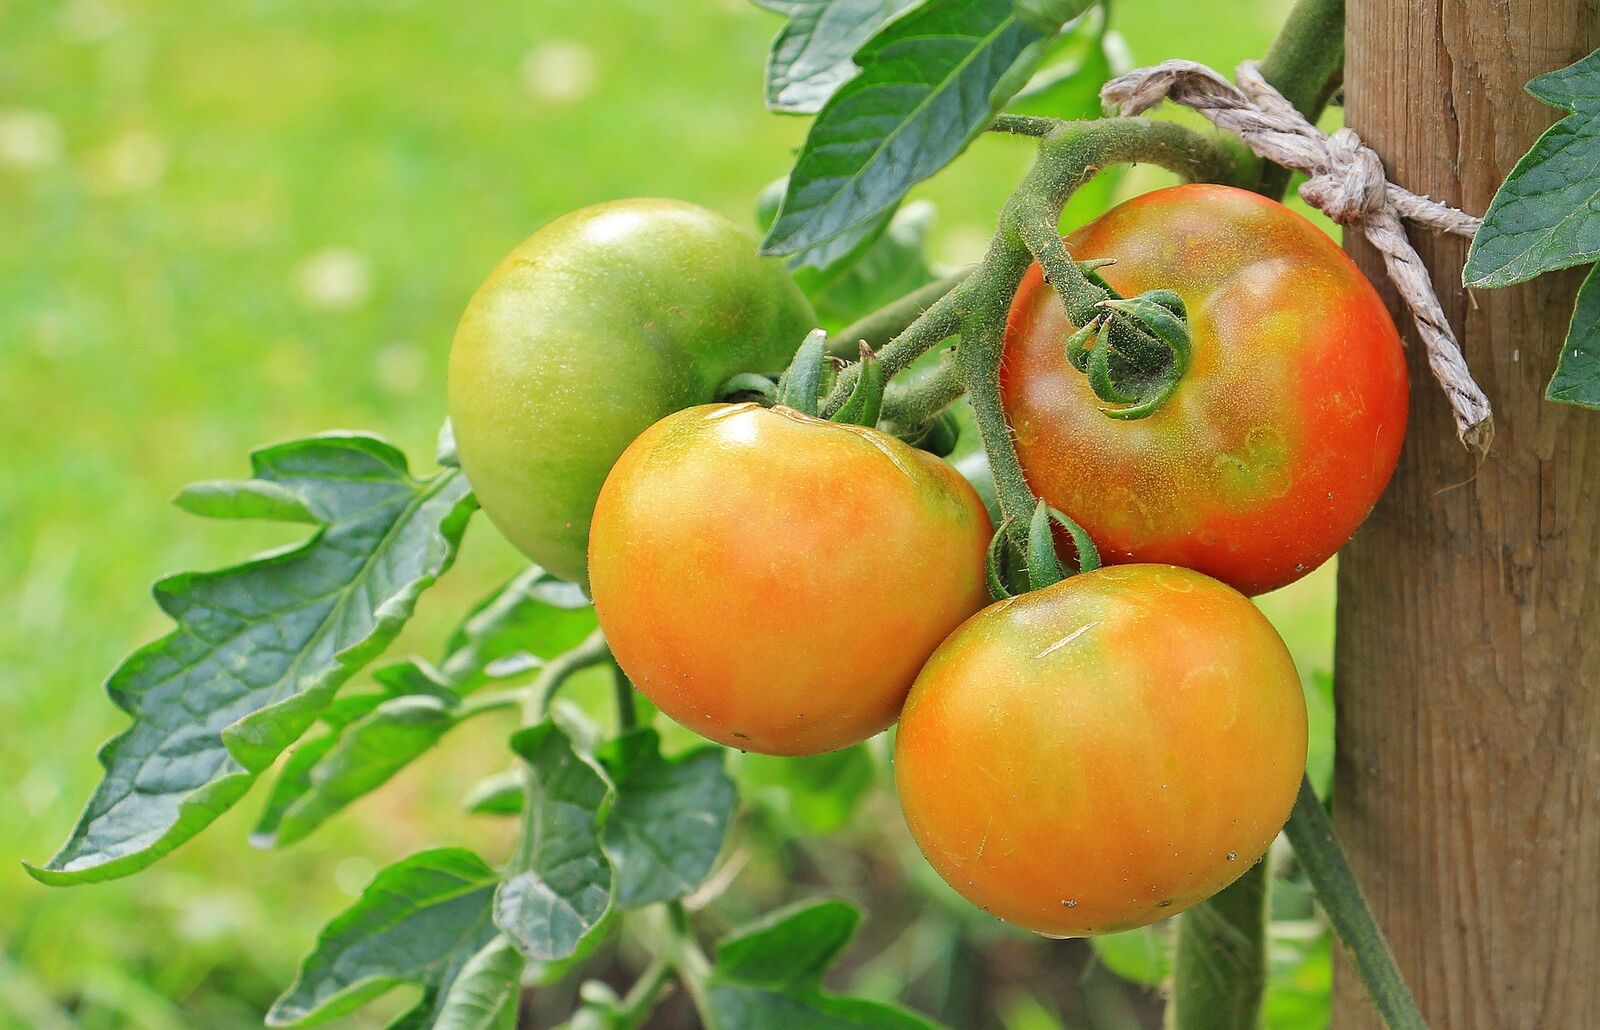 Tomato plant with ripe tomatoes